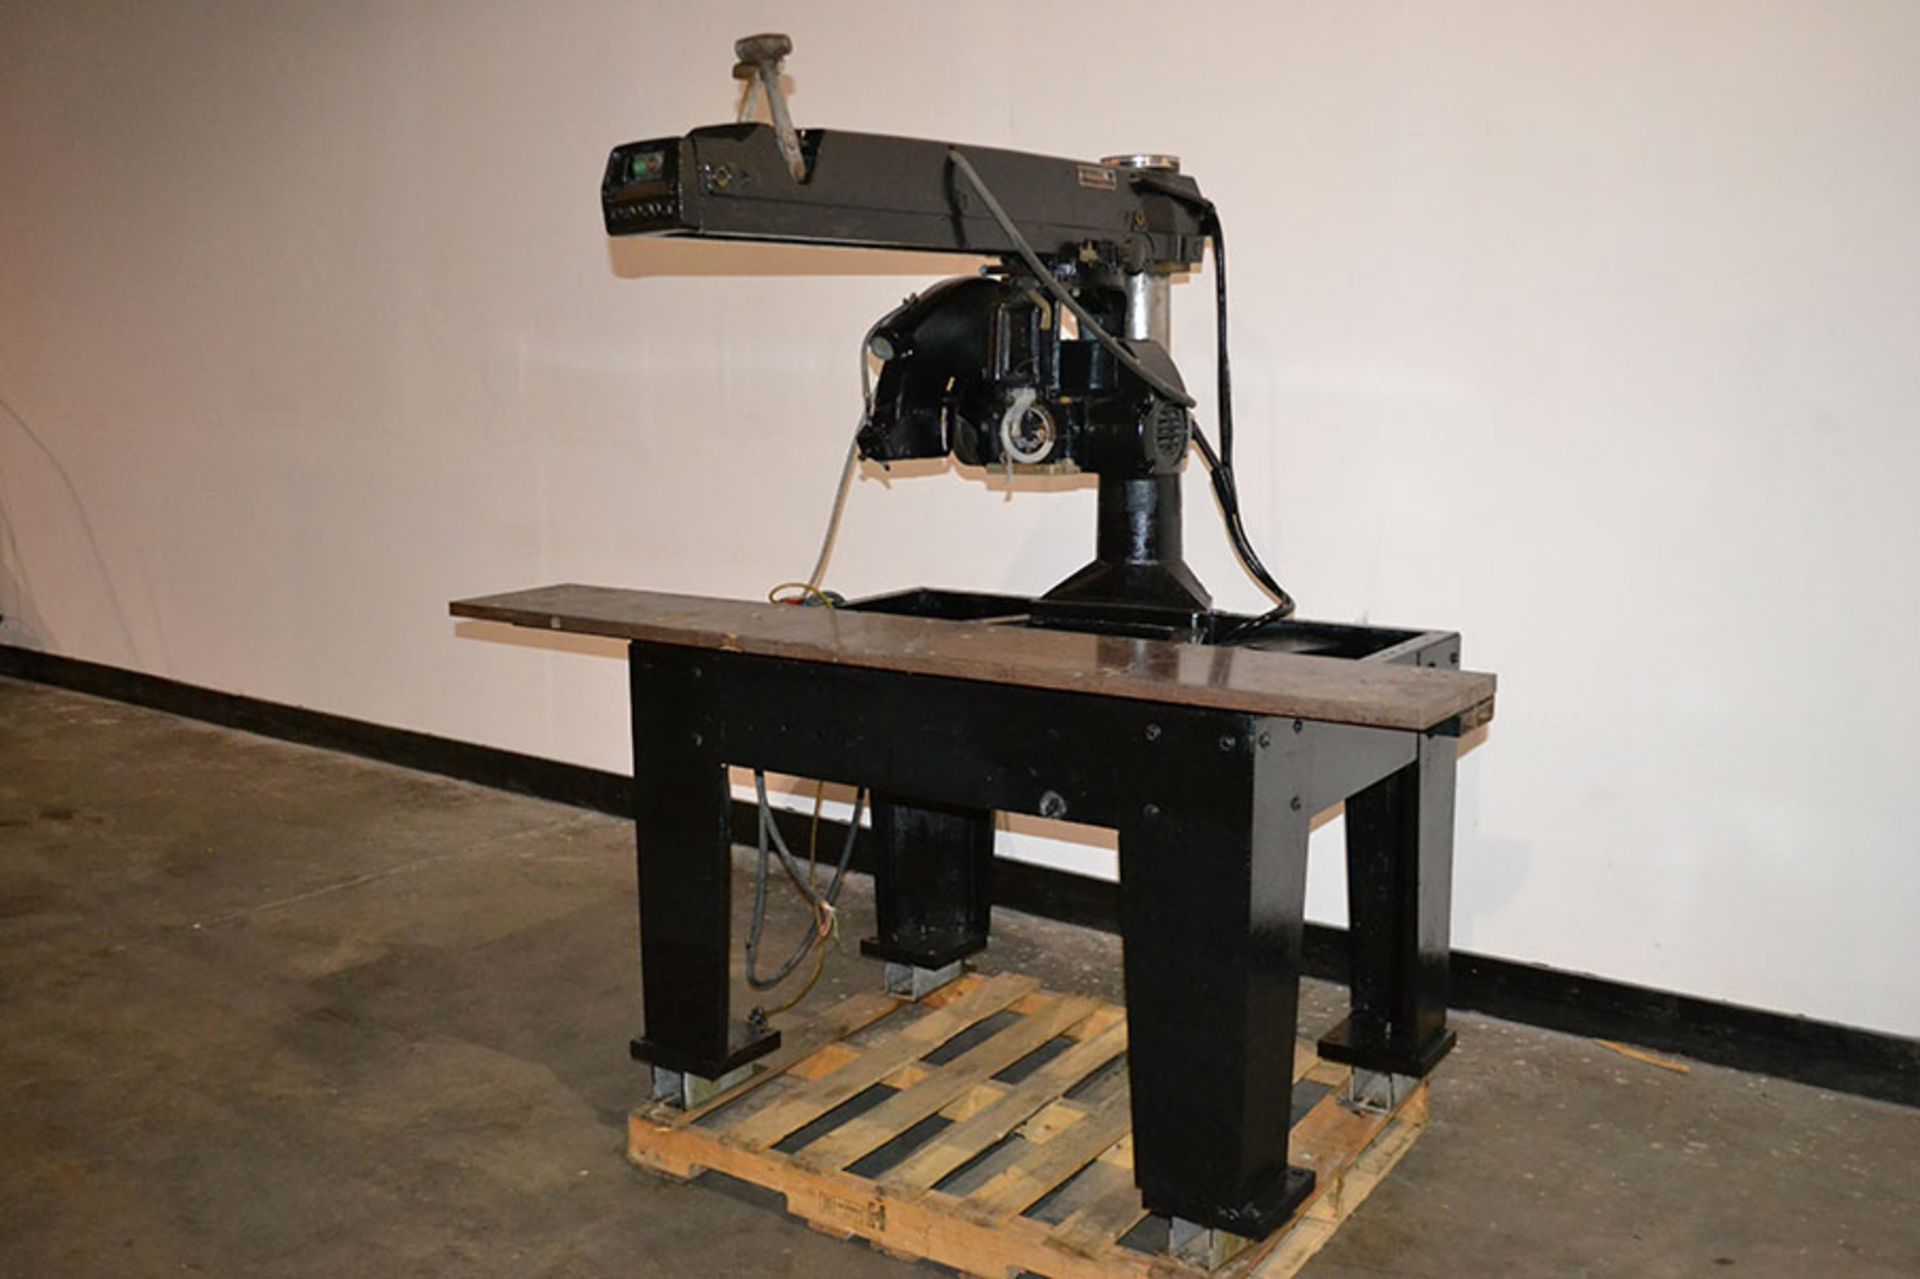 The Original 3558 20″ Super Duty 7.5HP Long Arm Radial Arm Saw - Image 3 of 9